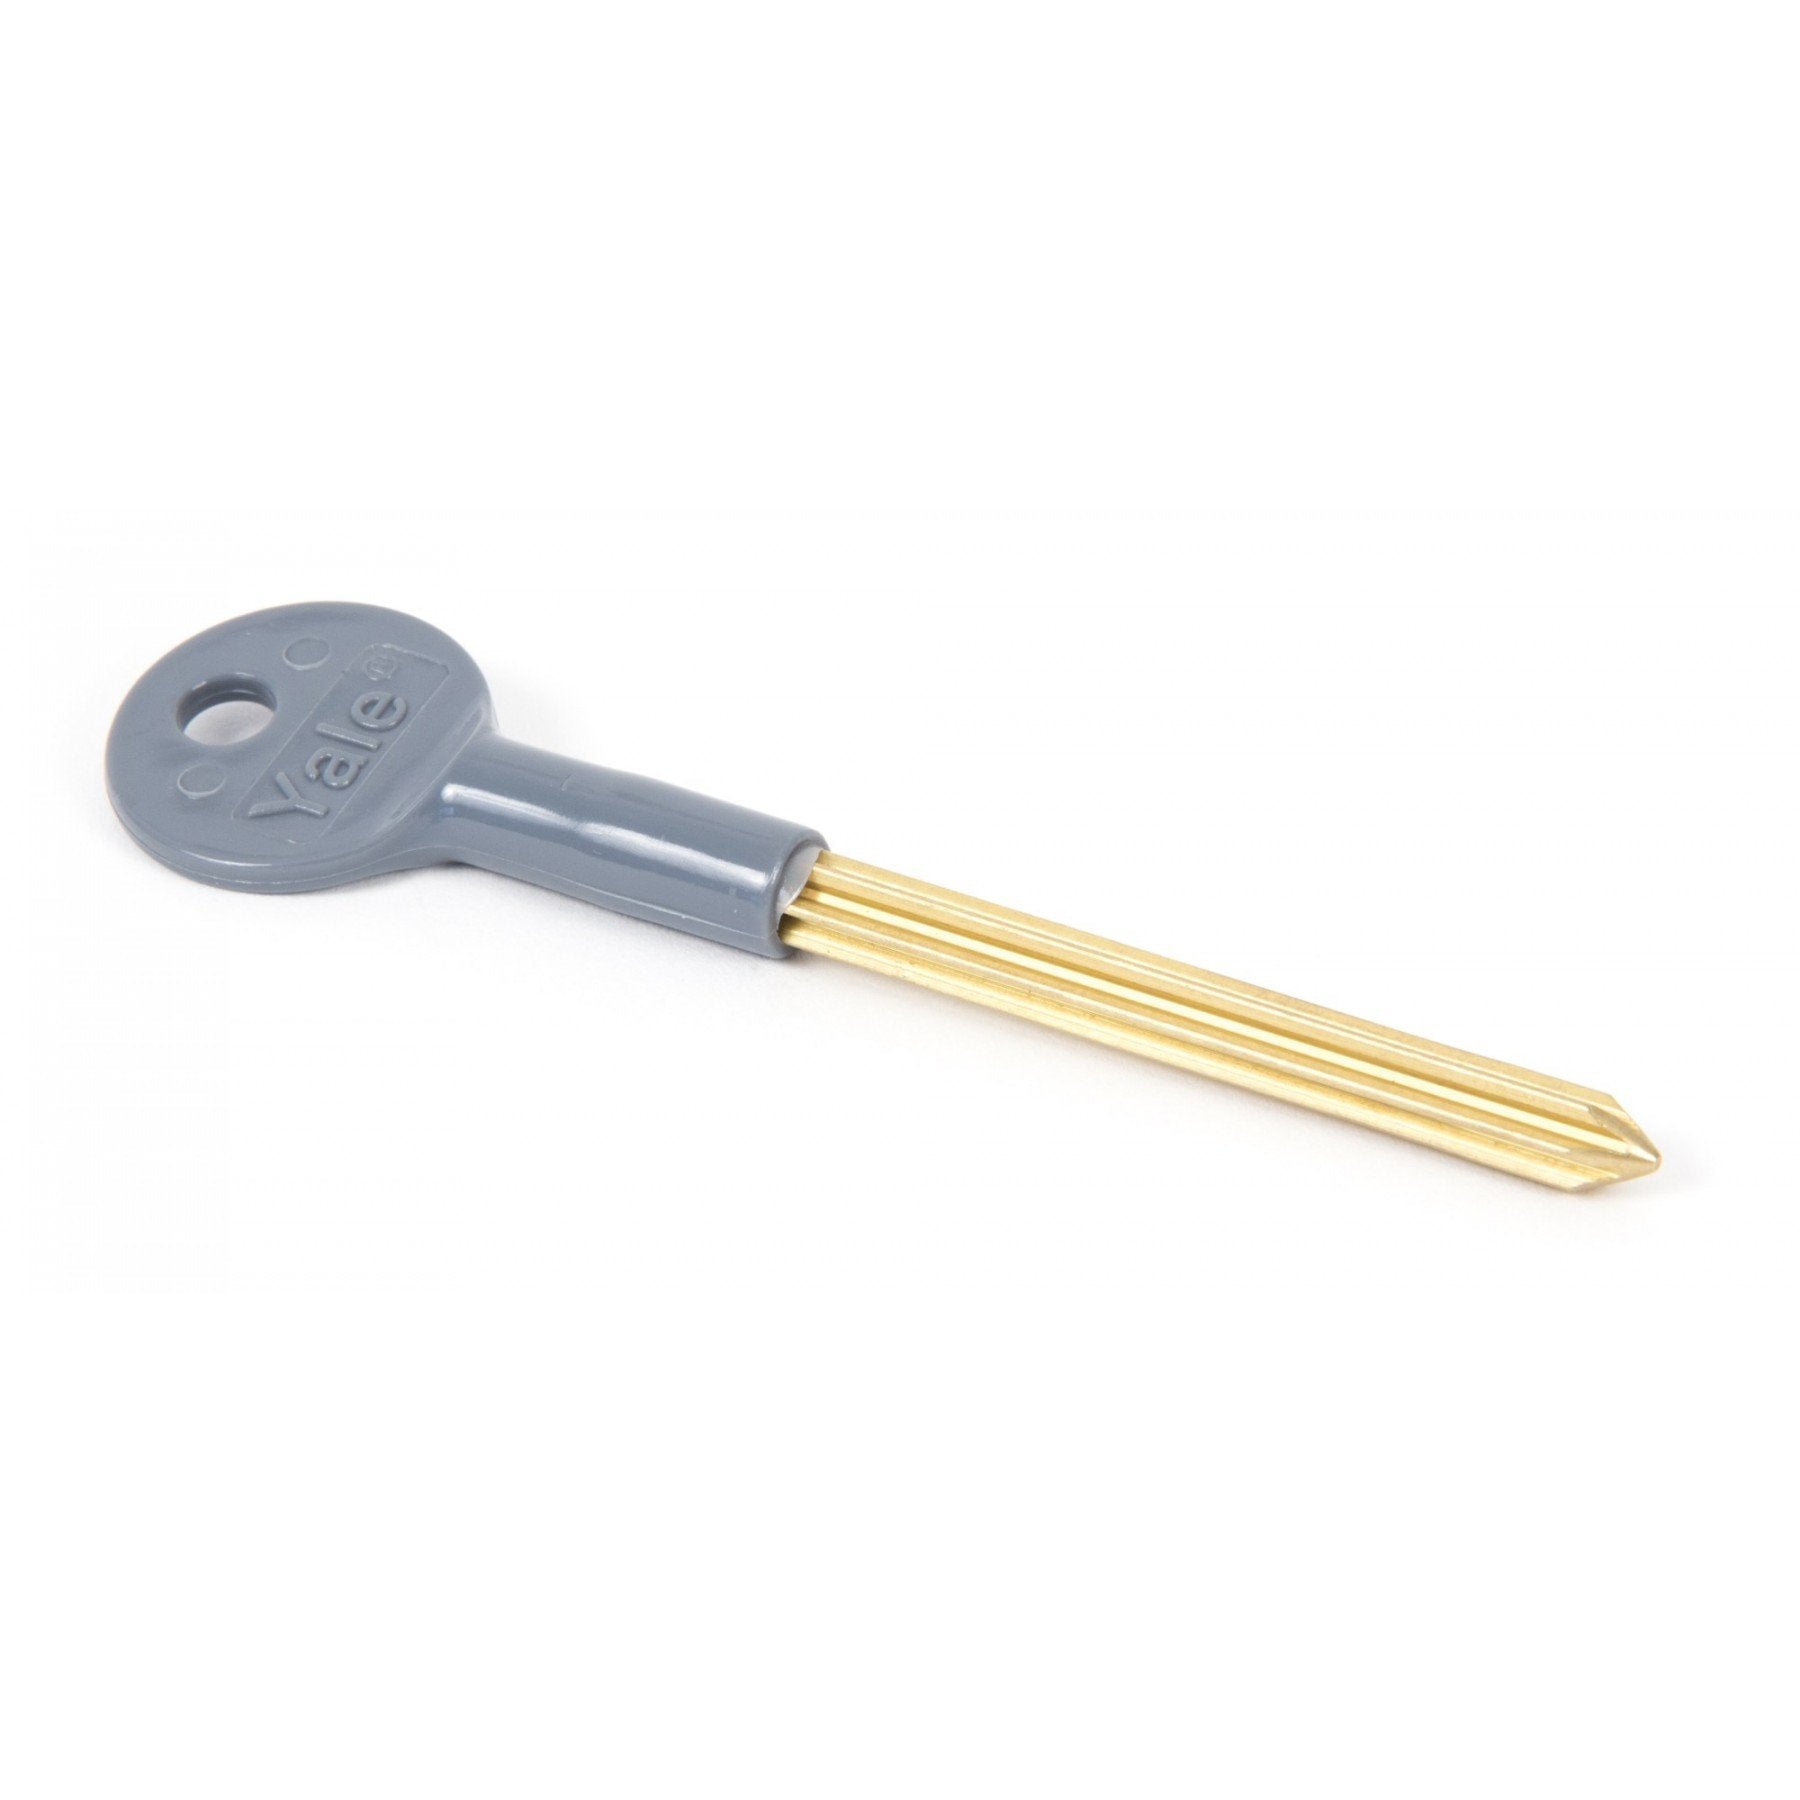 From the Anvil Chubb Long Security Star Key